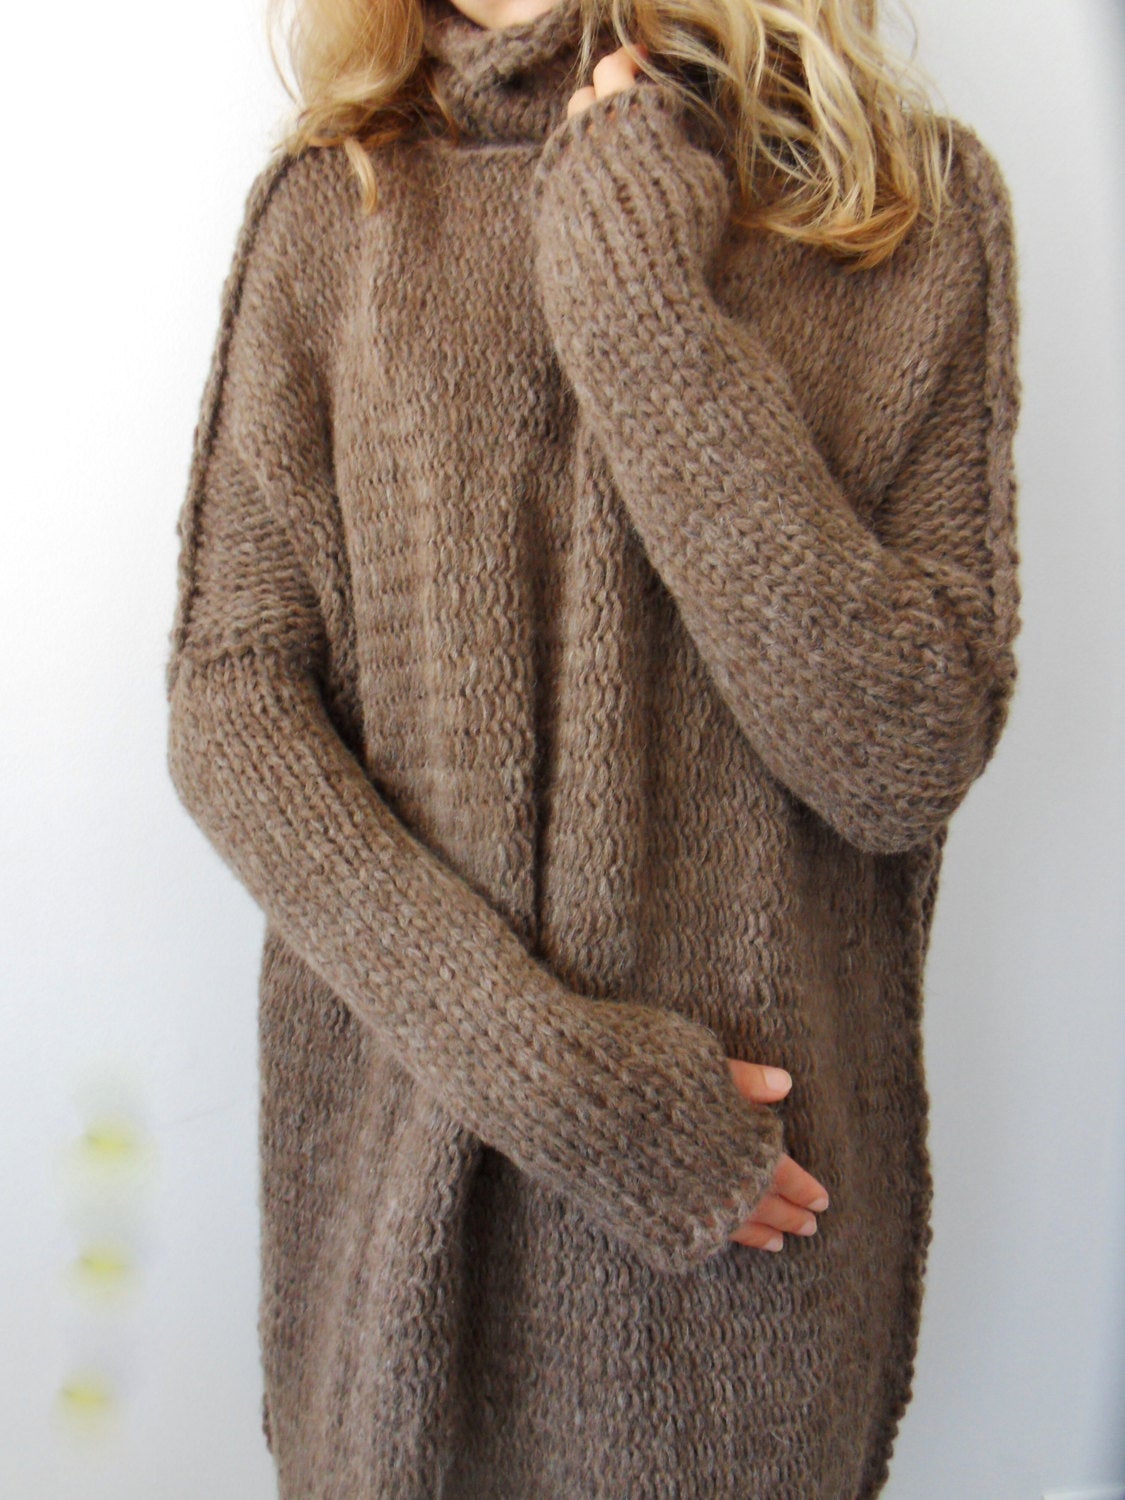 Brown alpaca wool knit  sweater. - RoseUniqueStyle